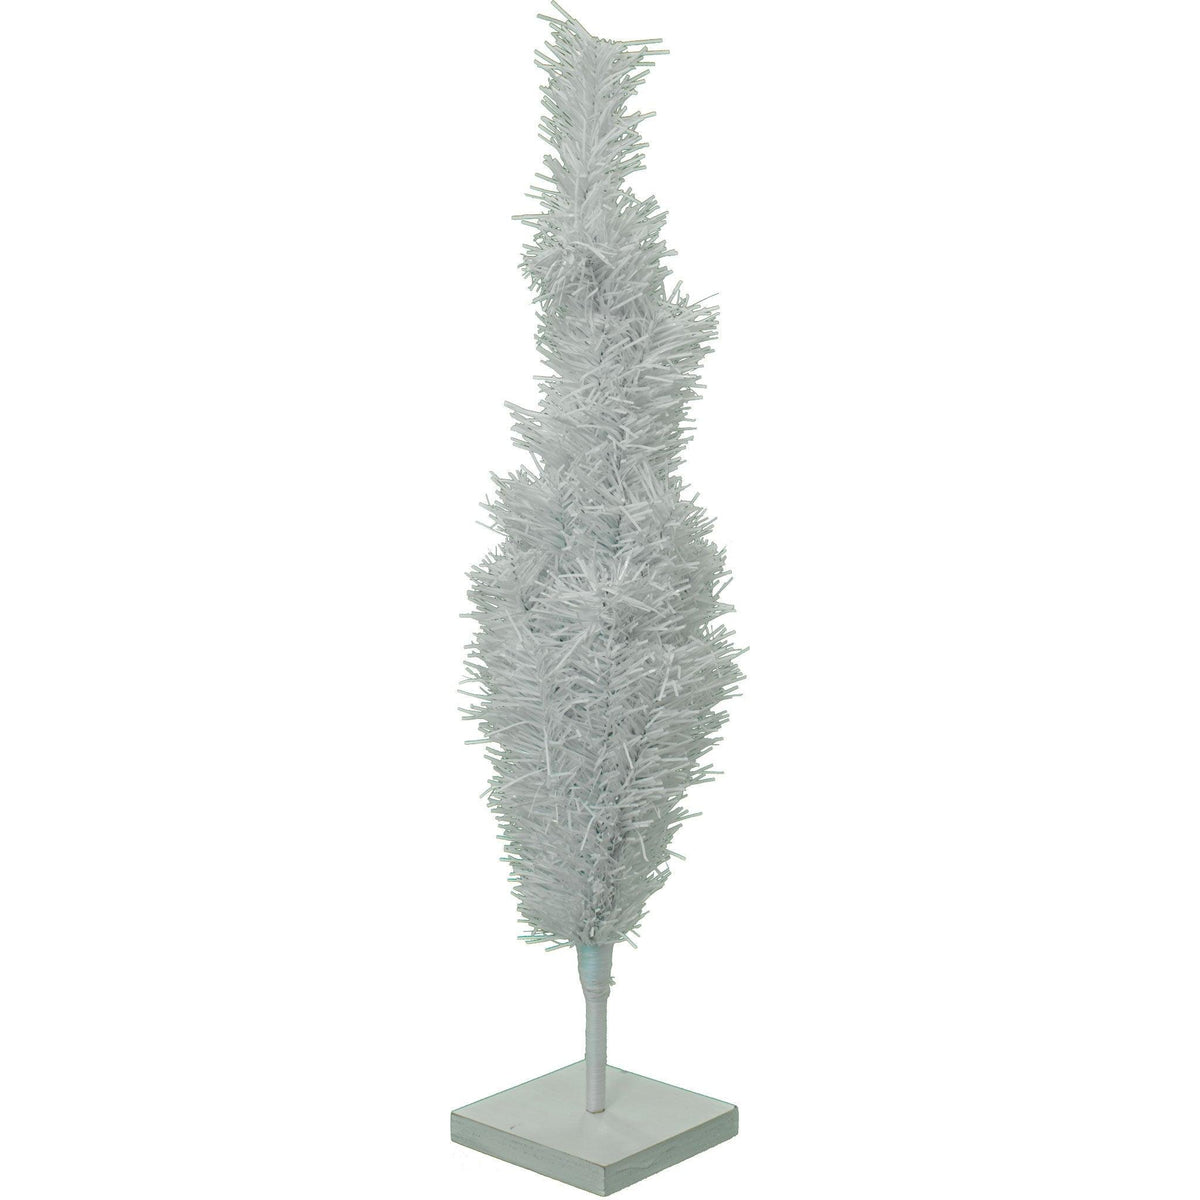 2FT White Tinsel Christmas Trees have folding branches to easily store in a small box and keep safe for another holiday season.  Shop at leedisplay.com